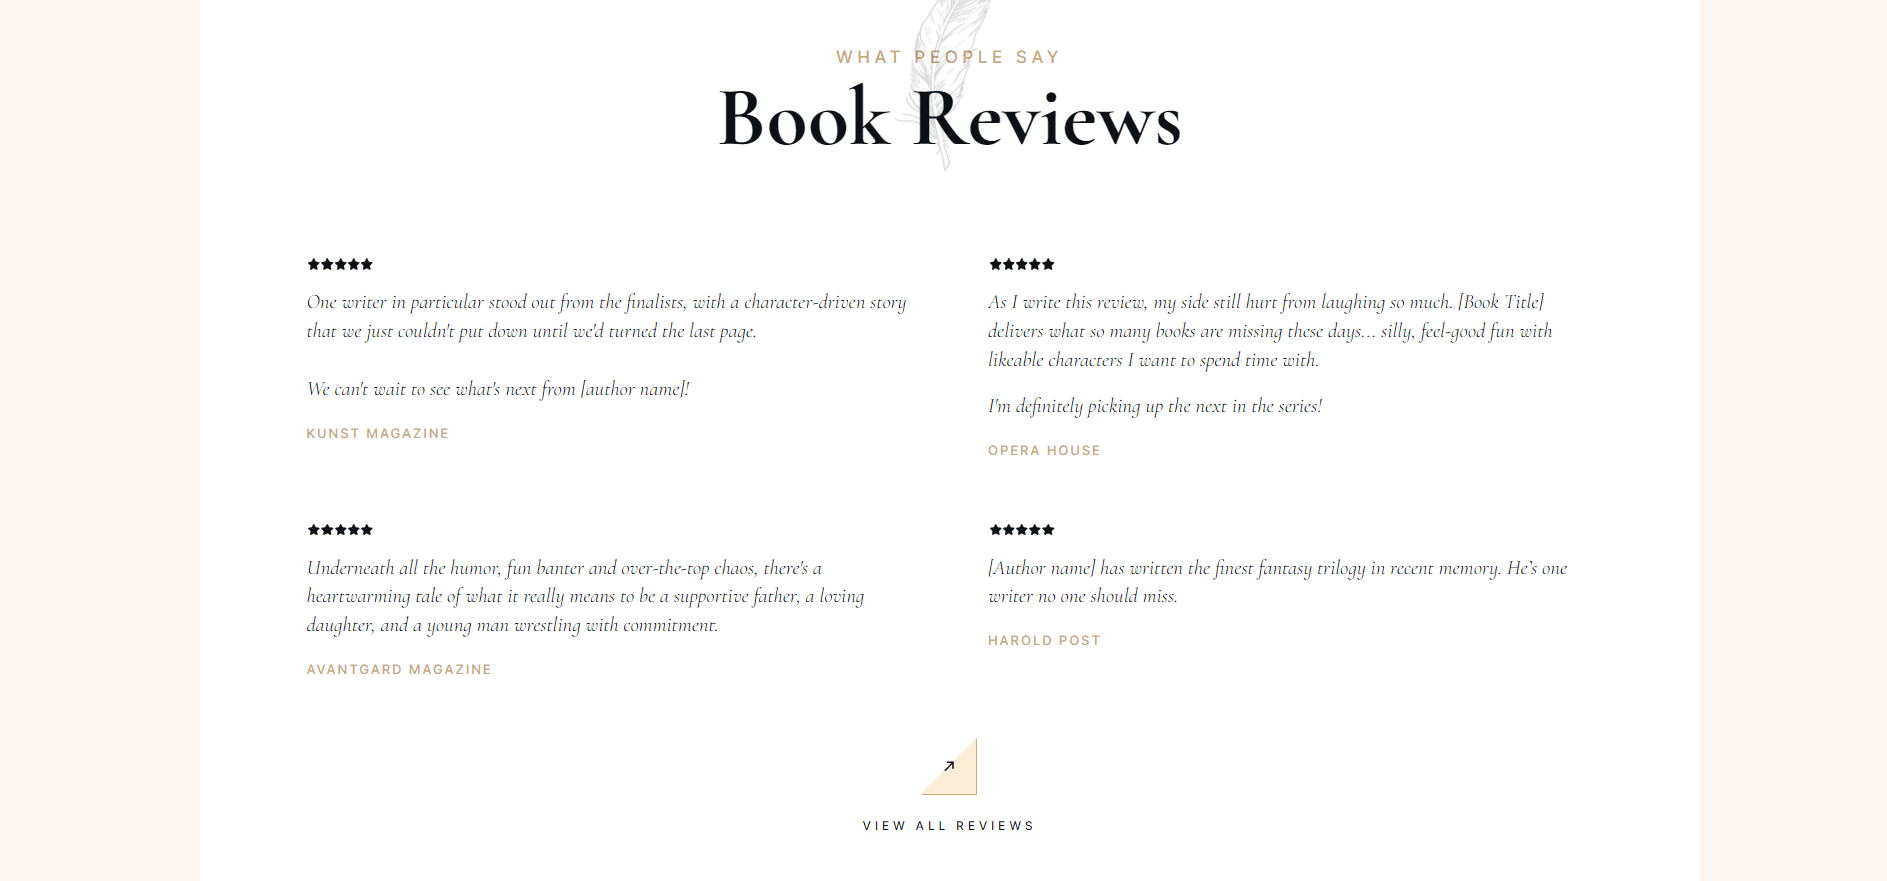 Snapshot of a “Book Reviews” block on an homepage in the Bookwise theme